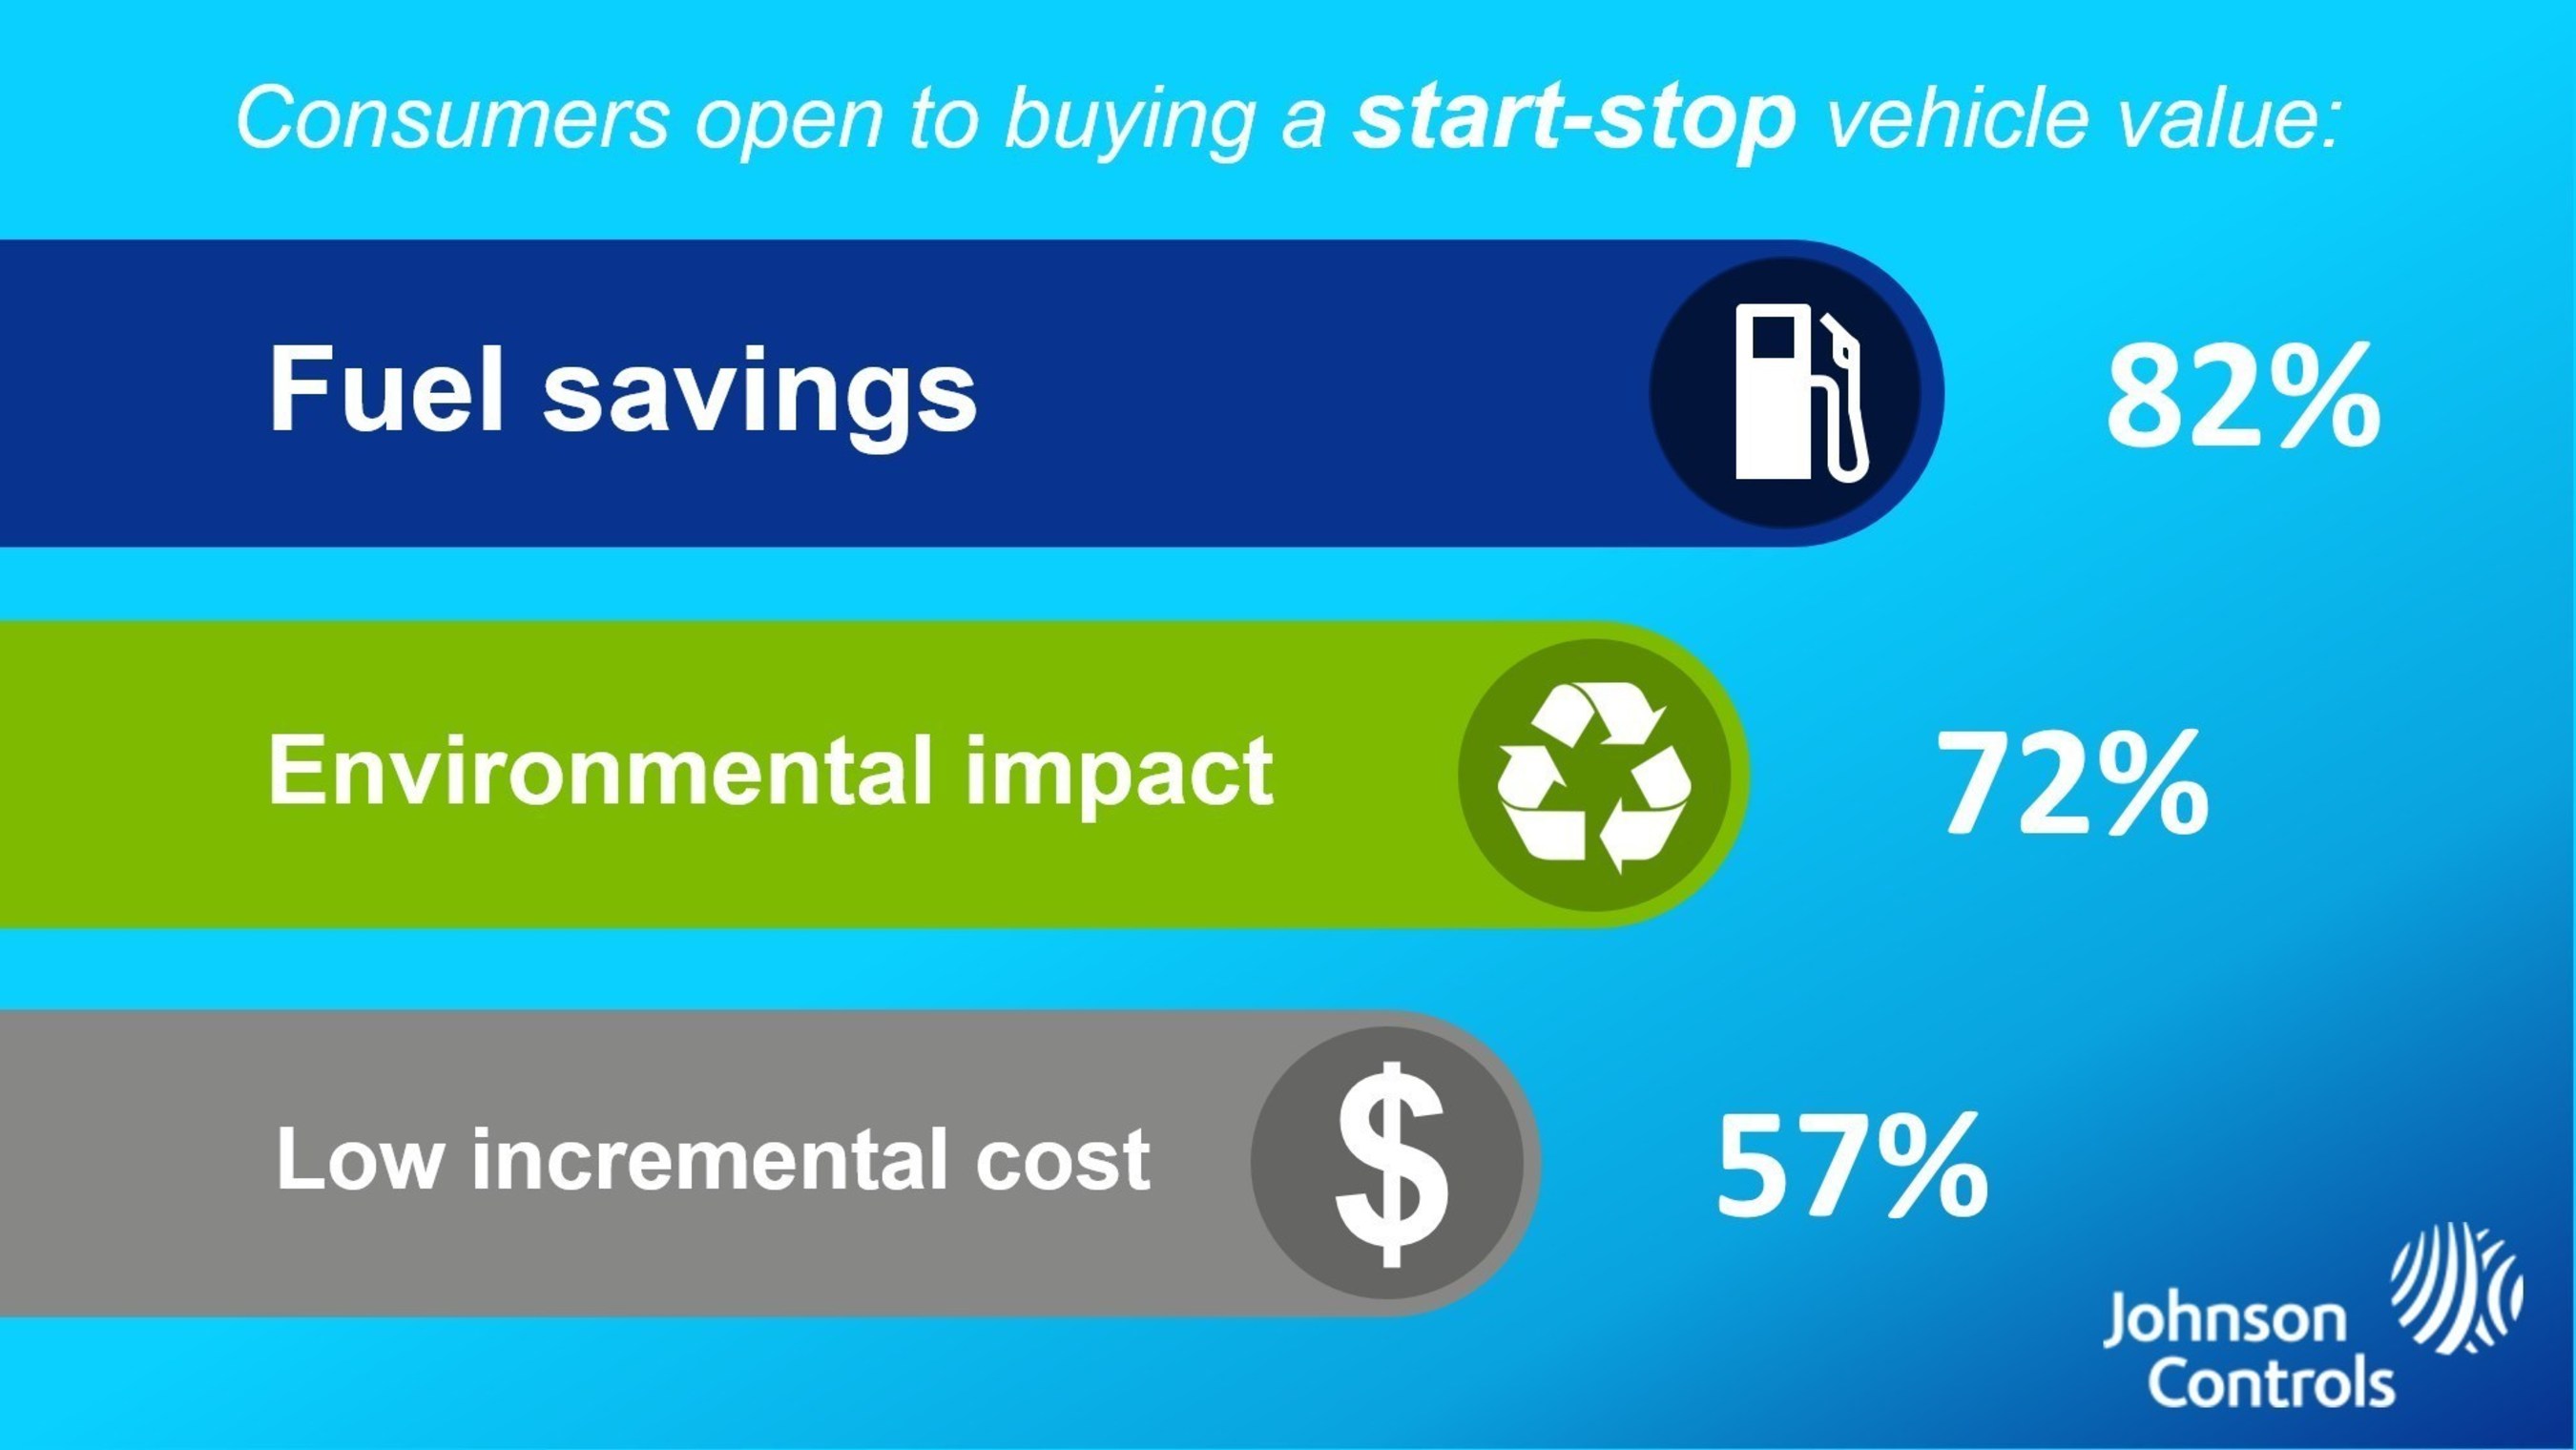 Eighty-two percent of consumers open to buying a start-stop vehicle value fuel savings, according to a survey conducted by the Opinion Research Corporation on behalf of Johnson Controls.